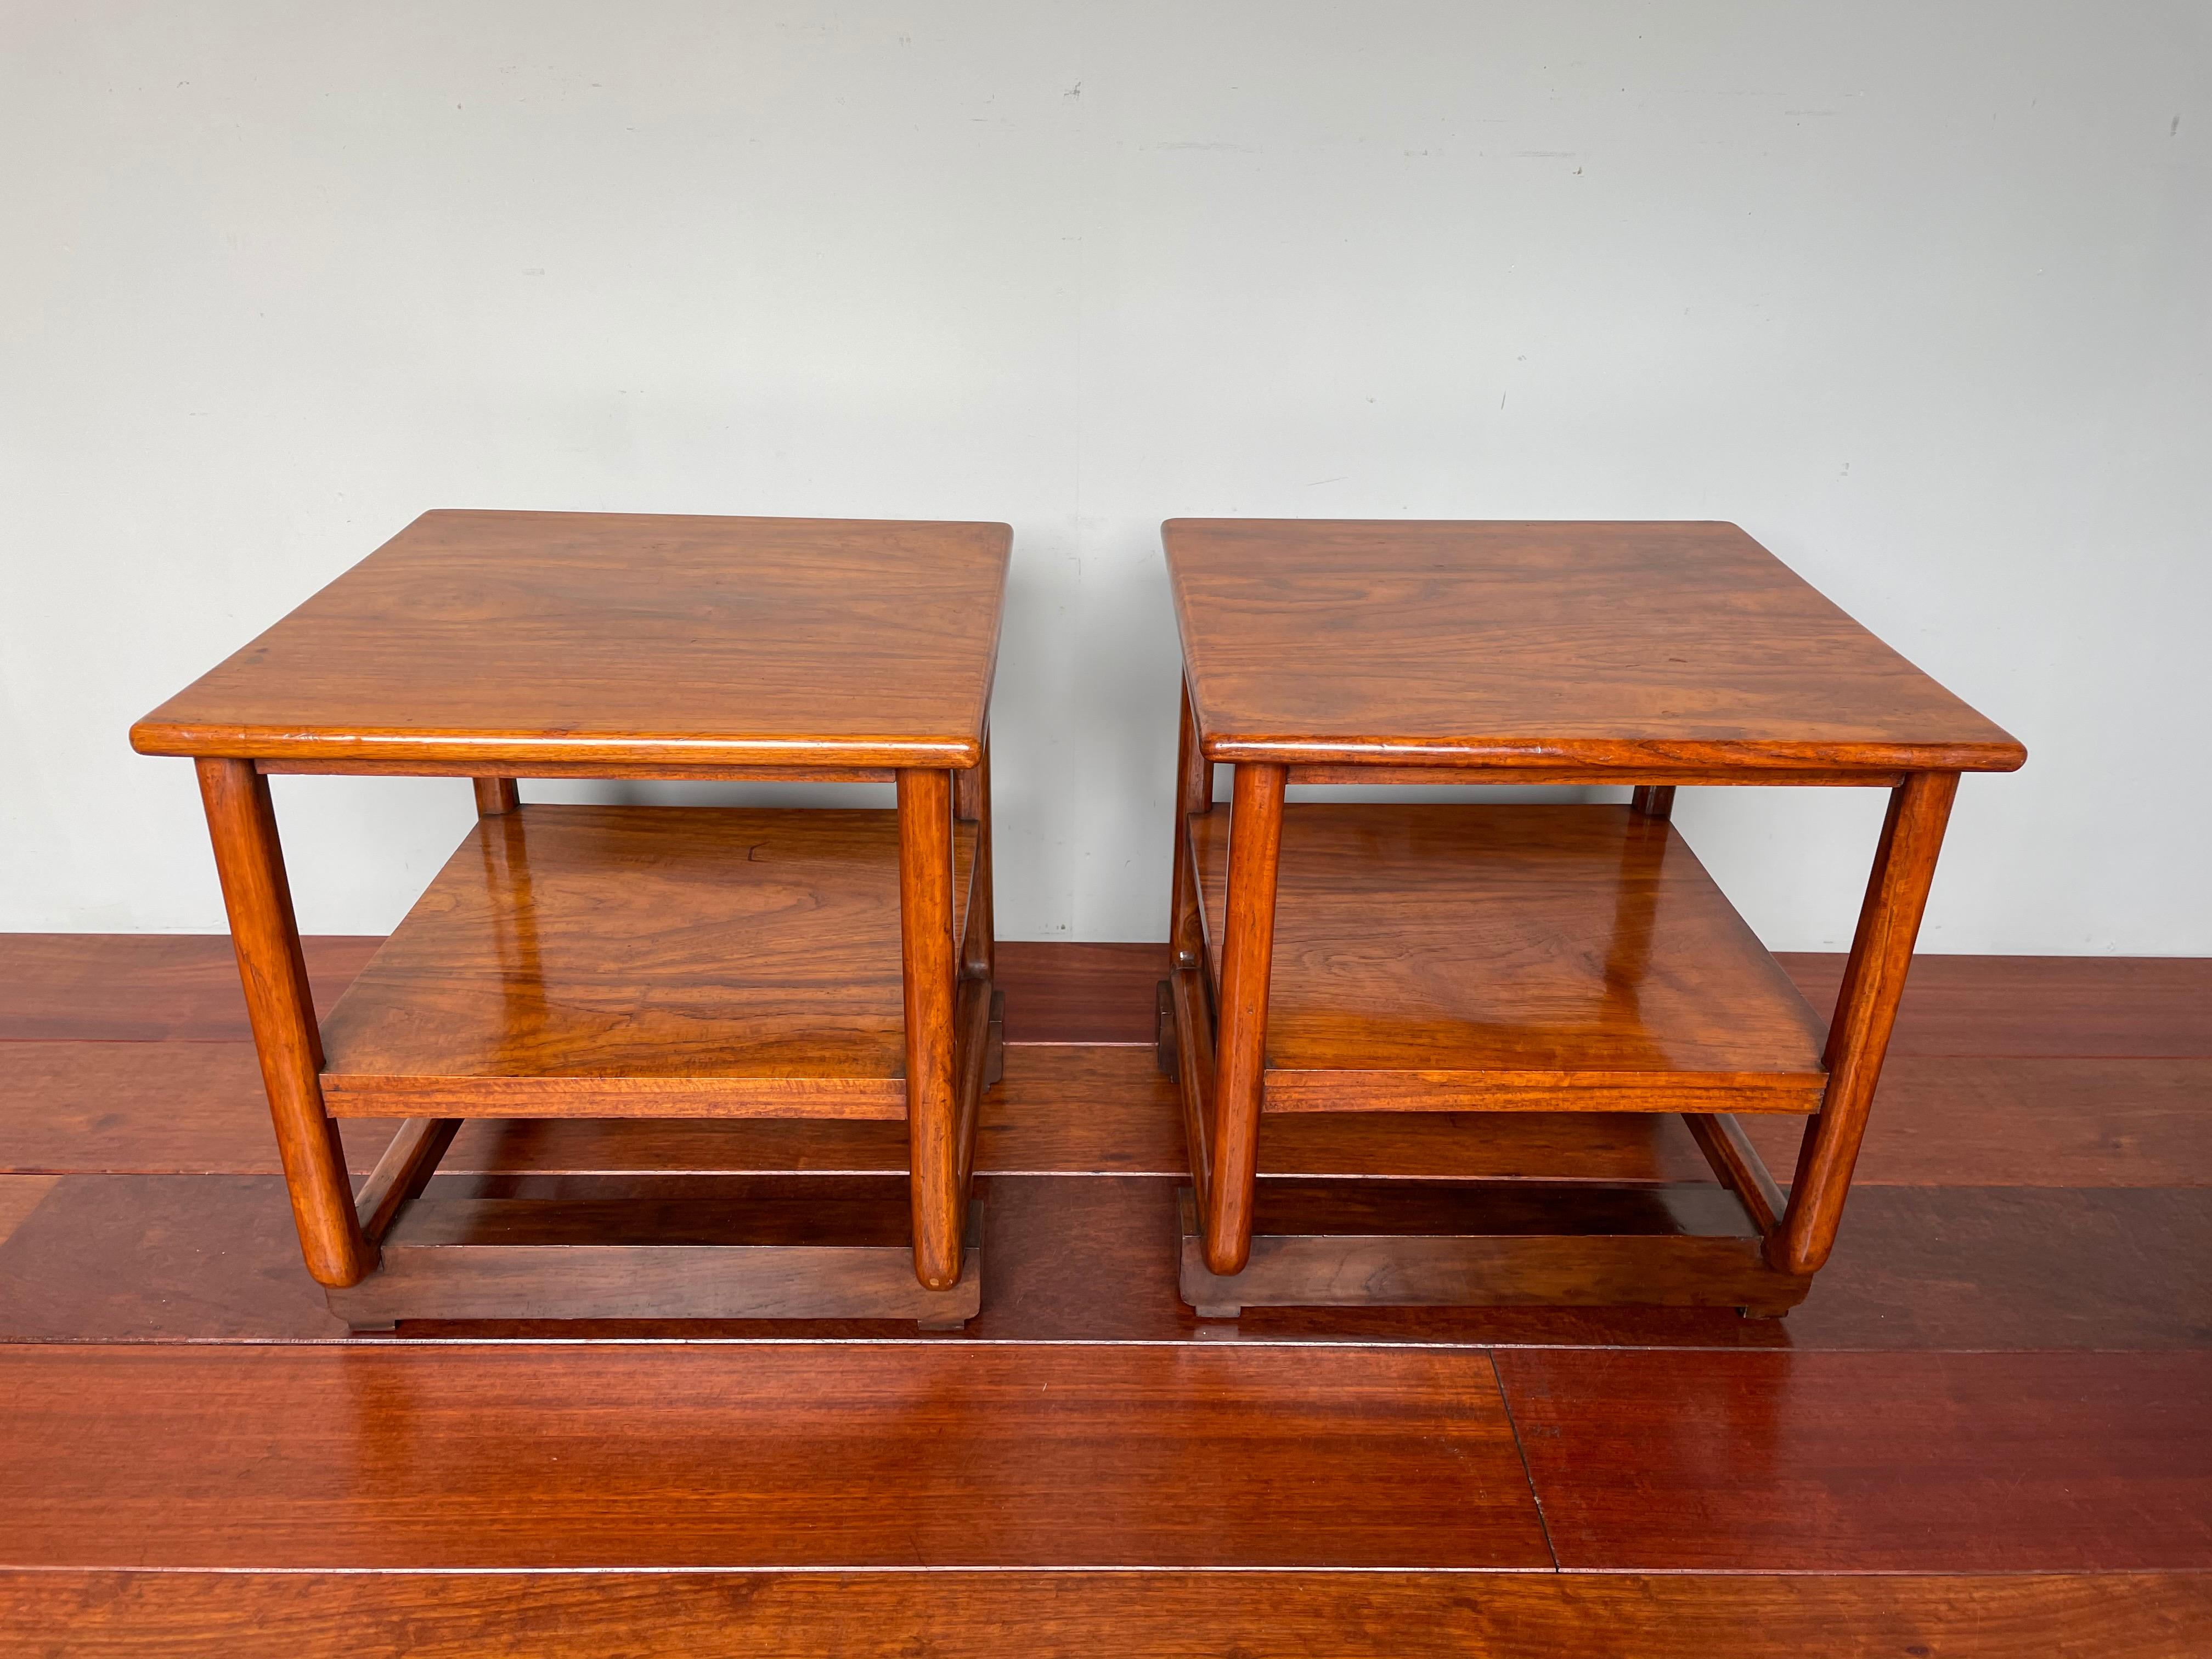 Rare pair of end tables or bedside tables or books tables or side tables or drinks tables.

One of us privately owned and used these rare tables for over ten years, Their timeless, Dutch colonial Art Deco design is what makes them suitable for all